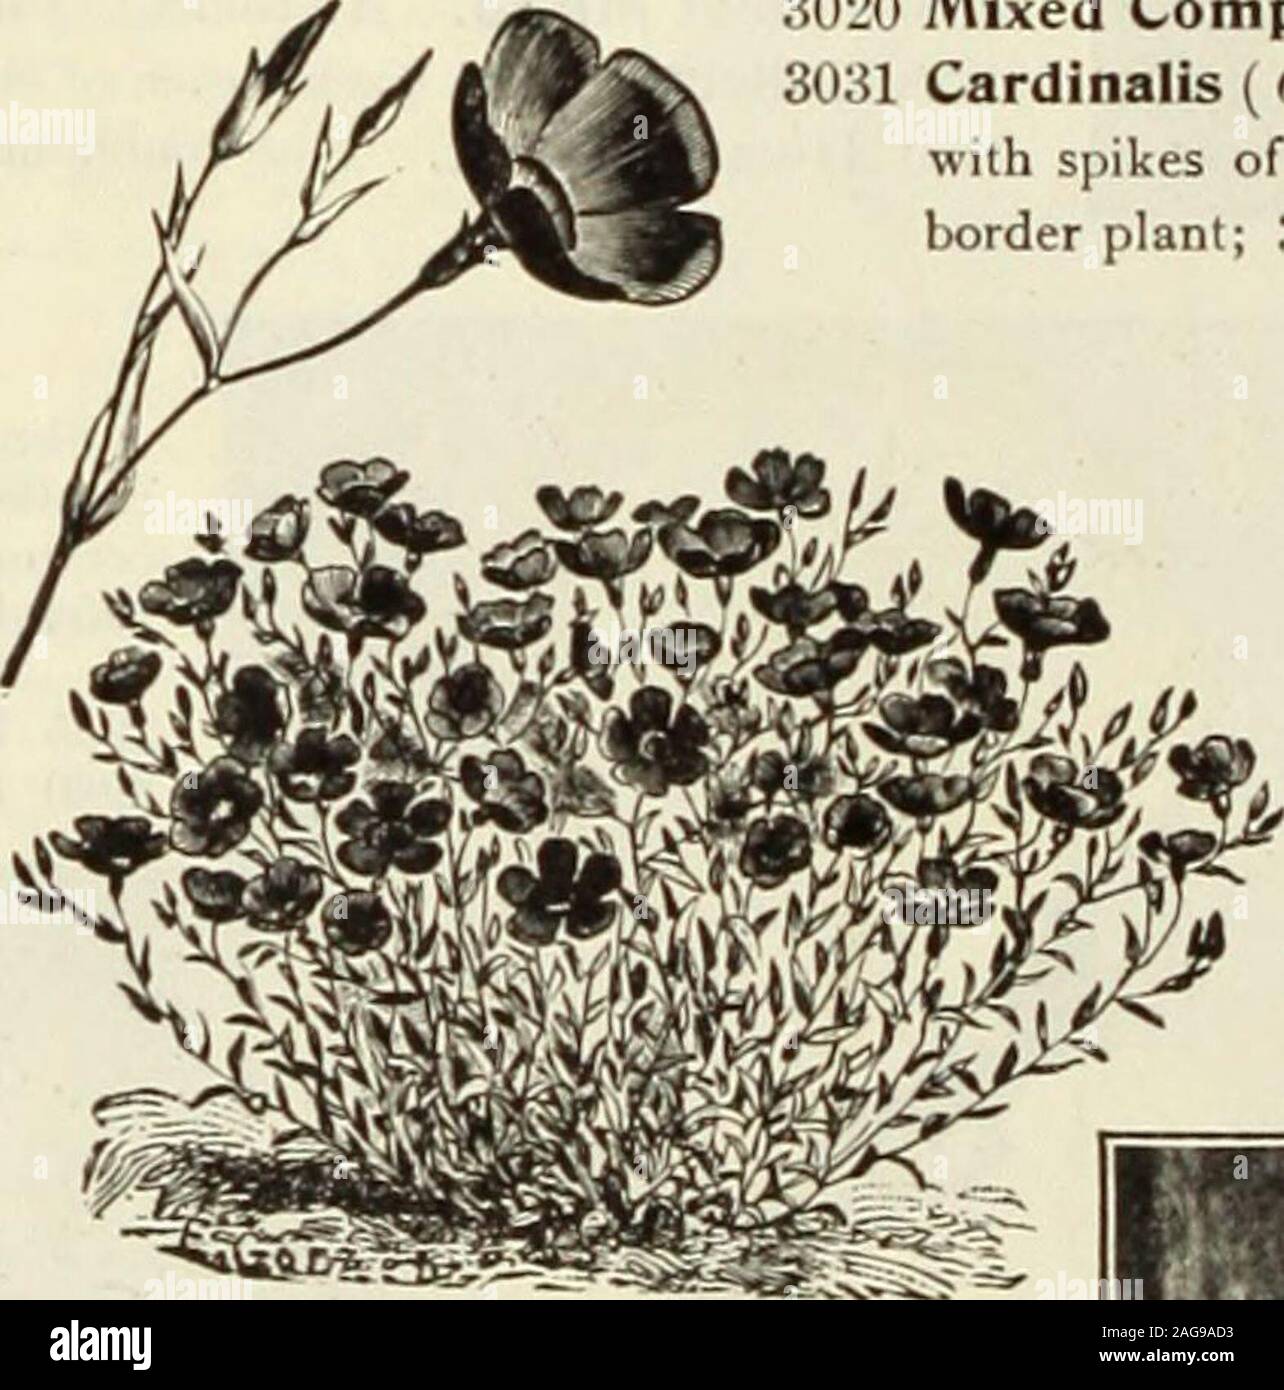 . Dreer's 1913 garden book. wer early, and con-tinuing to bloom without interruption until frost. The plant forms denseglobular bushes about 6 inches high, completely smothered with large flowers, of a most brilliant sky-blue, with a clear white eye 15 3015 Prima Donna. Rich velvety crimson-maroon flowers .... 10 301G White Gem. Forms a perfect ball of snow-white flowers 10 3023 Speciosa. Ultramarine blue; dark-leaved; trailing, 5 3022 Gracilis. Light blue; light green foliage; trailing 5 3024 Tenuior. Of upright habit, about 15 inches high, with very large flowersof rich cobalt blue with whit Stock Photo